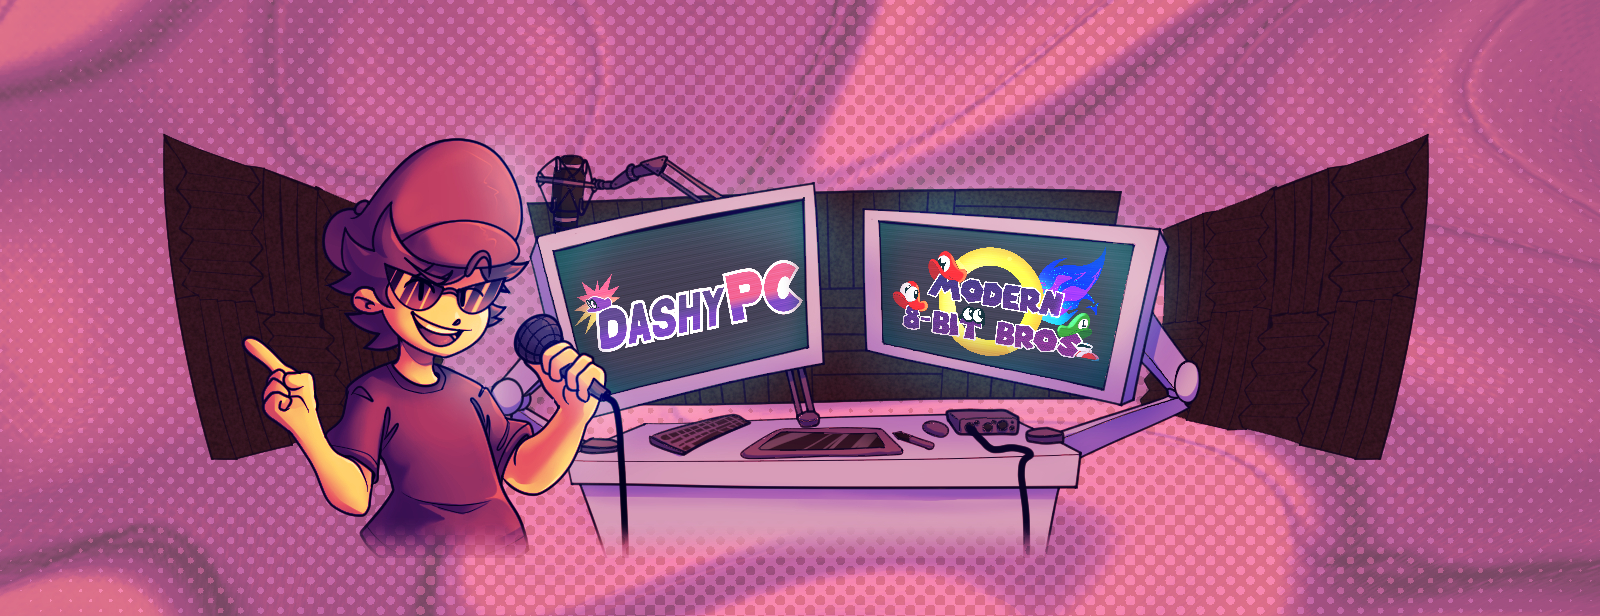 banner commission for Dashy PC